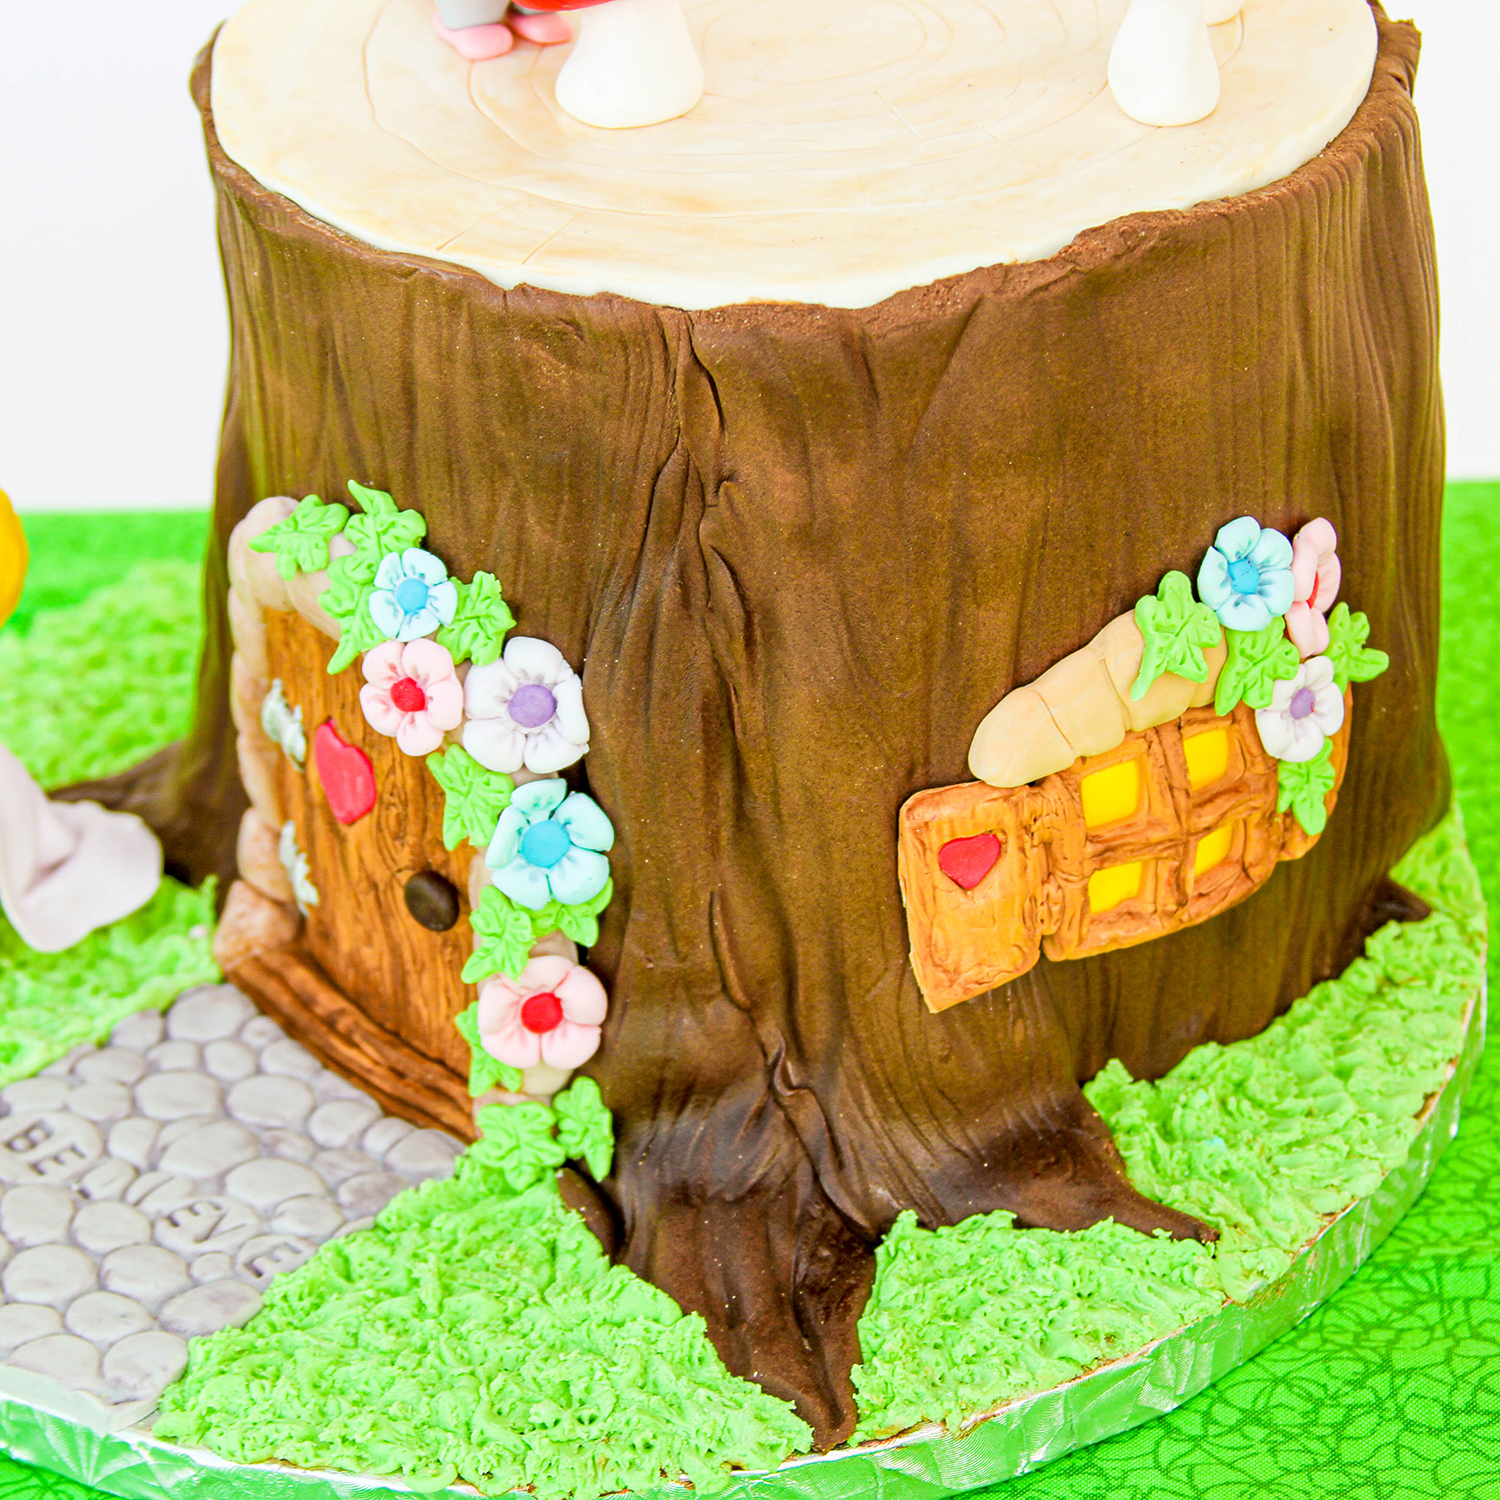 Side view of the fairy's tree trunk house with carrot covered side window.